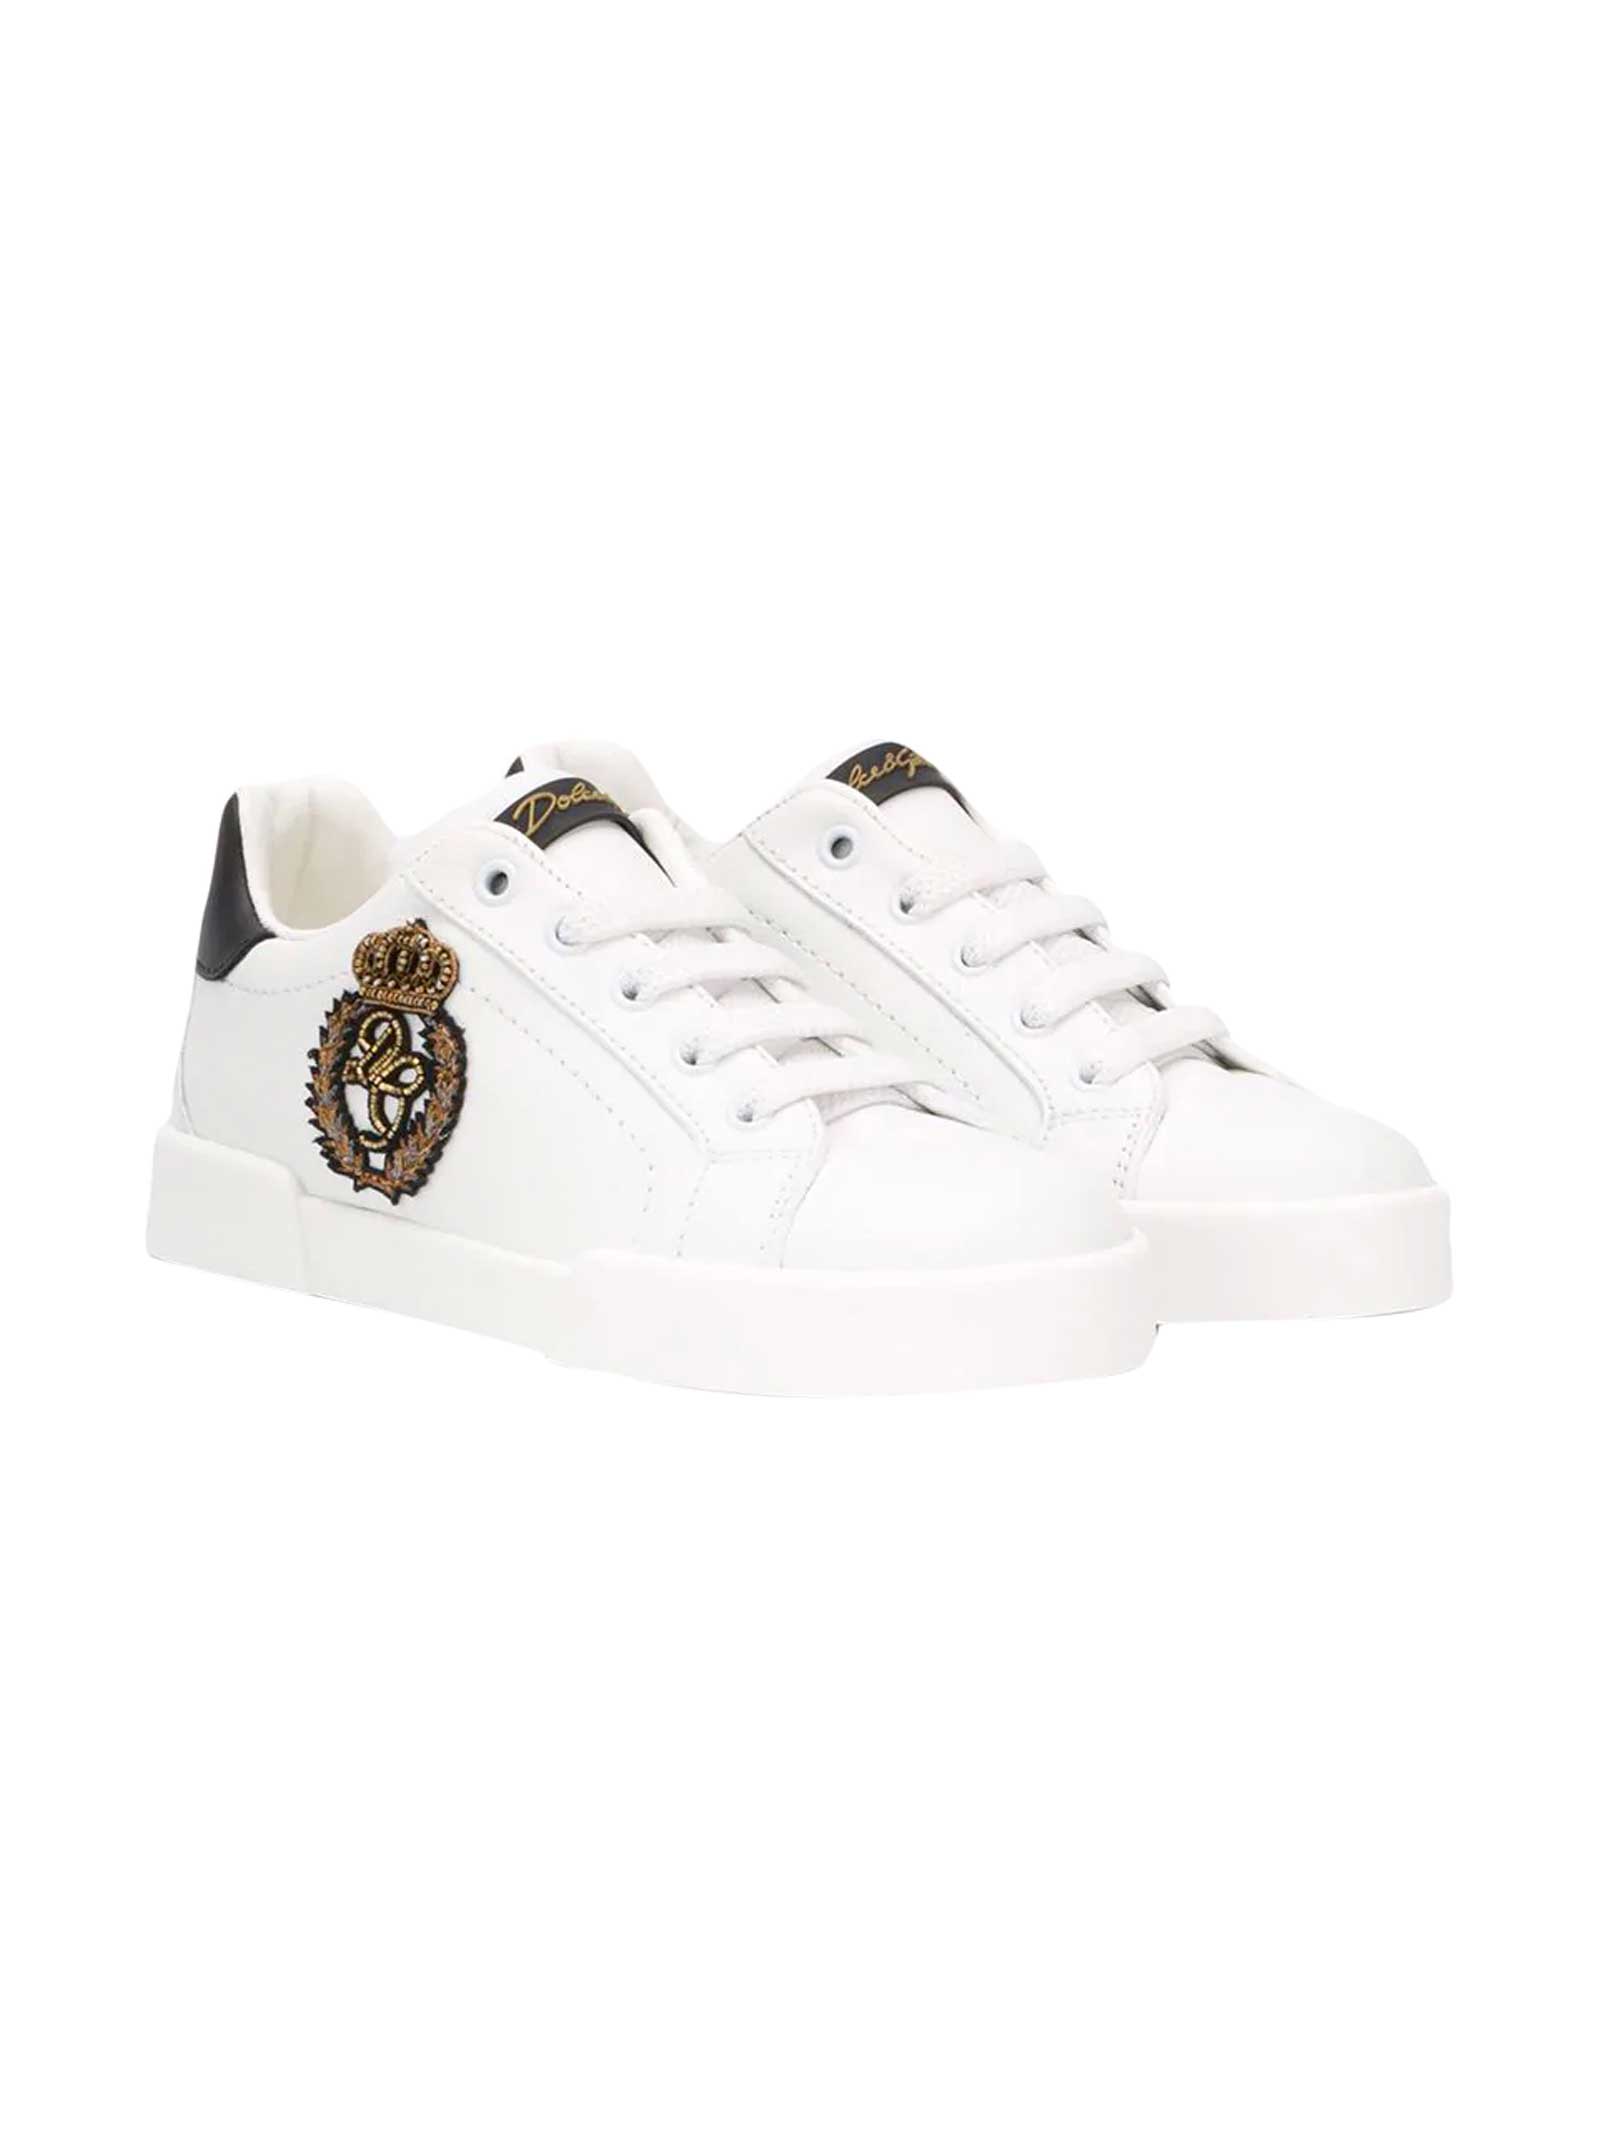 Dolce & Gabbana White Sneakers With crown Application Dolce & gabbana Kids